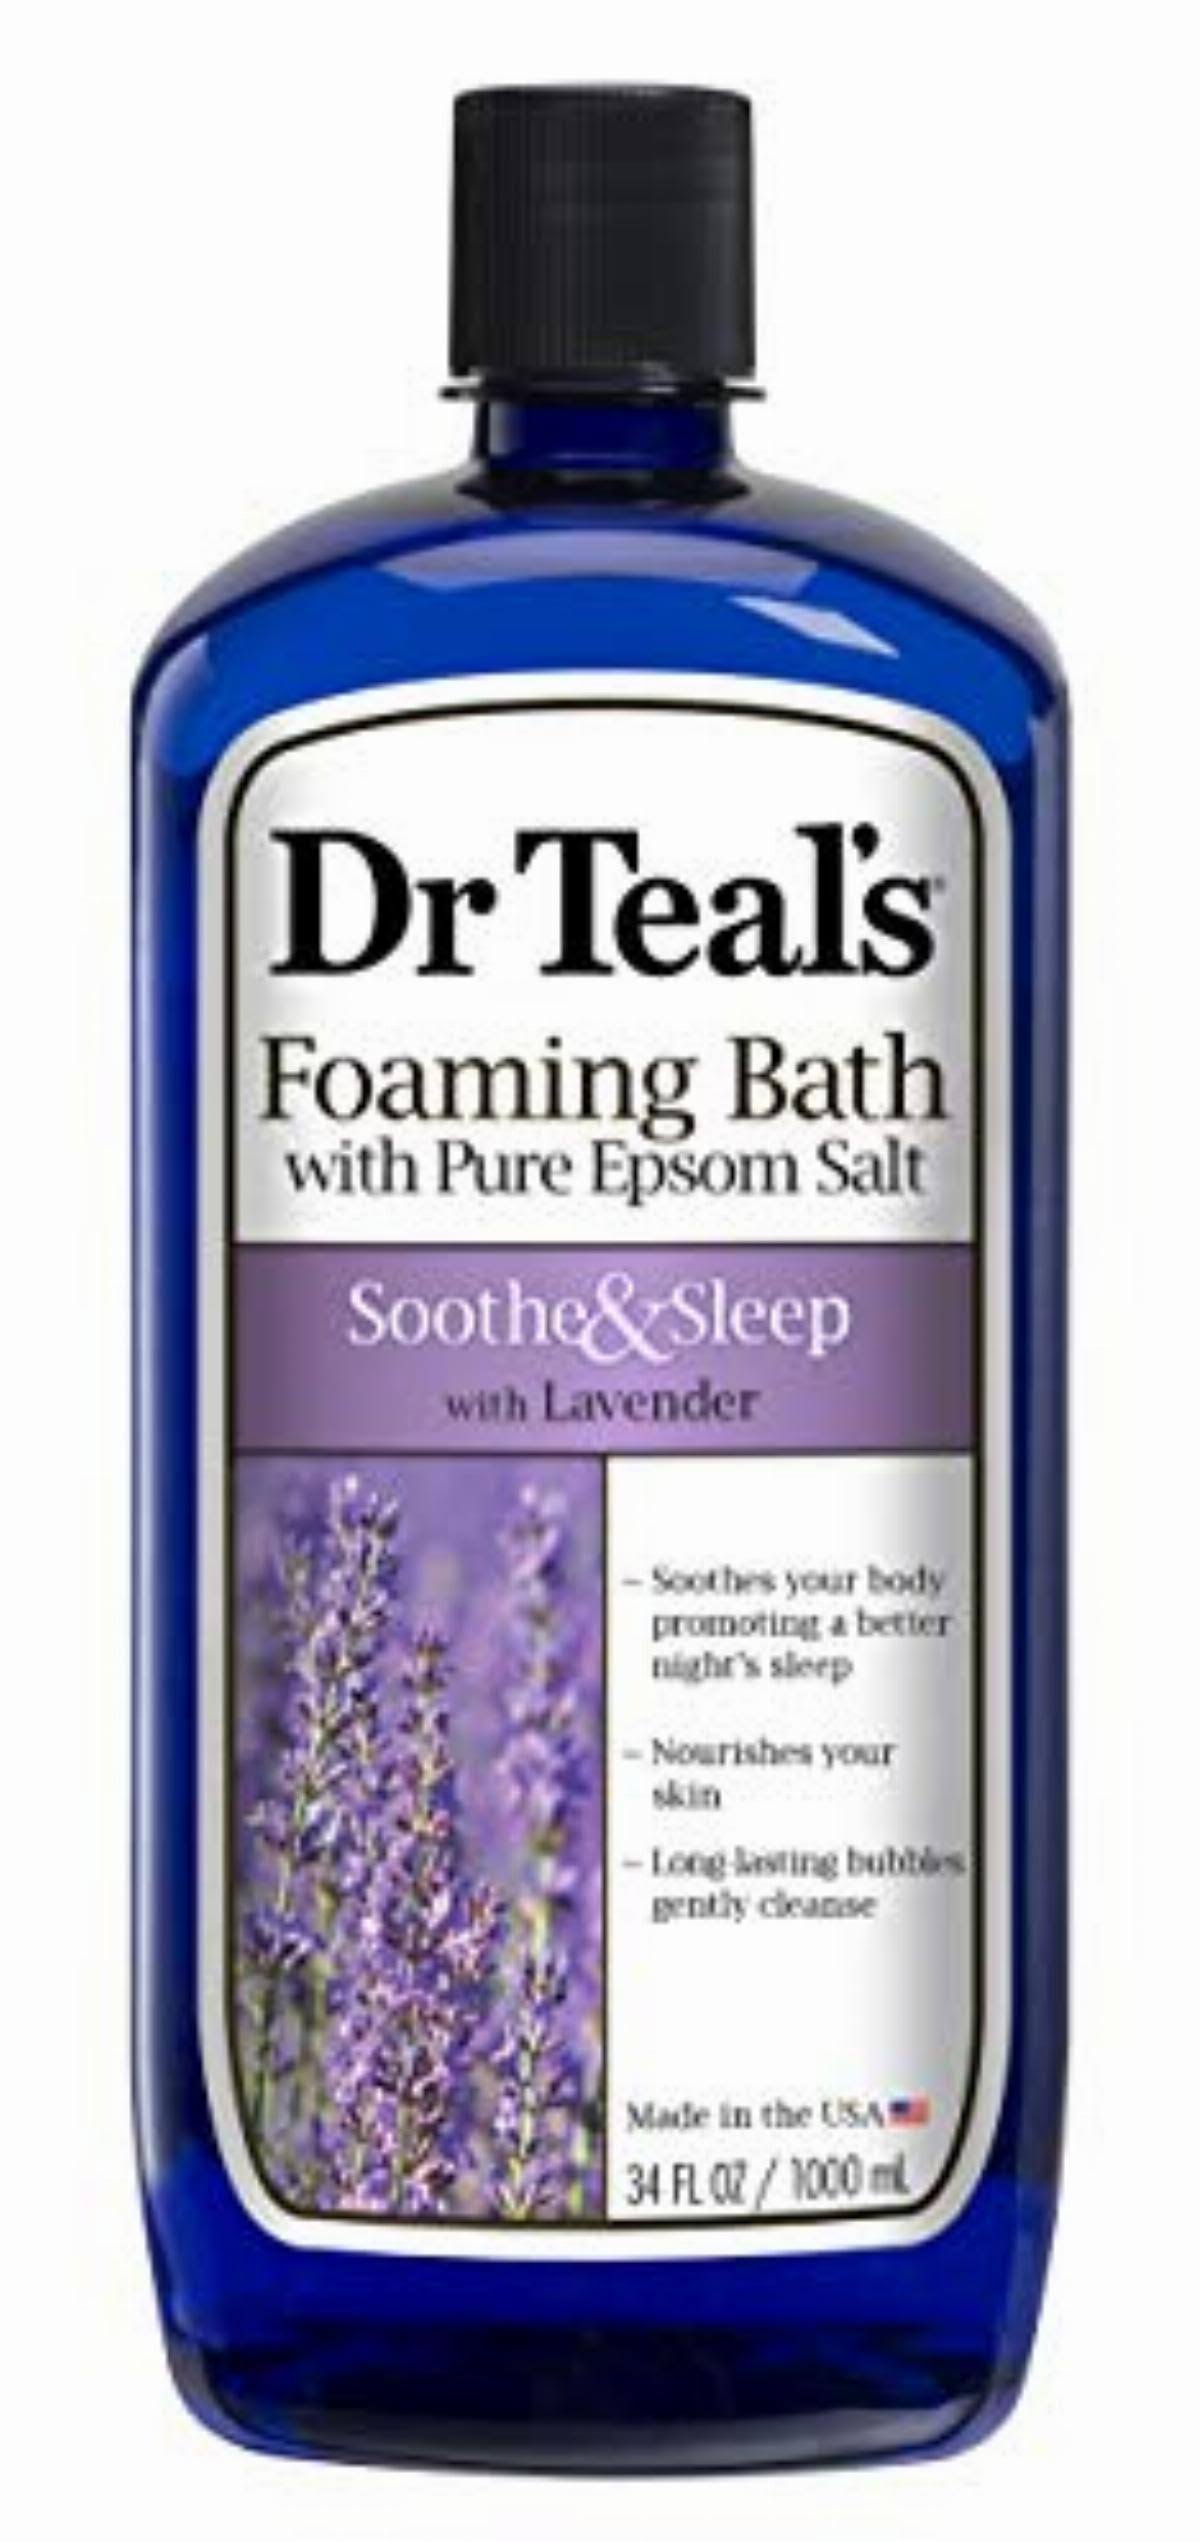 Dr Teal's Soothe and Sleep with Lavender Foaming Bath - 1000ml